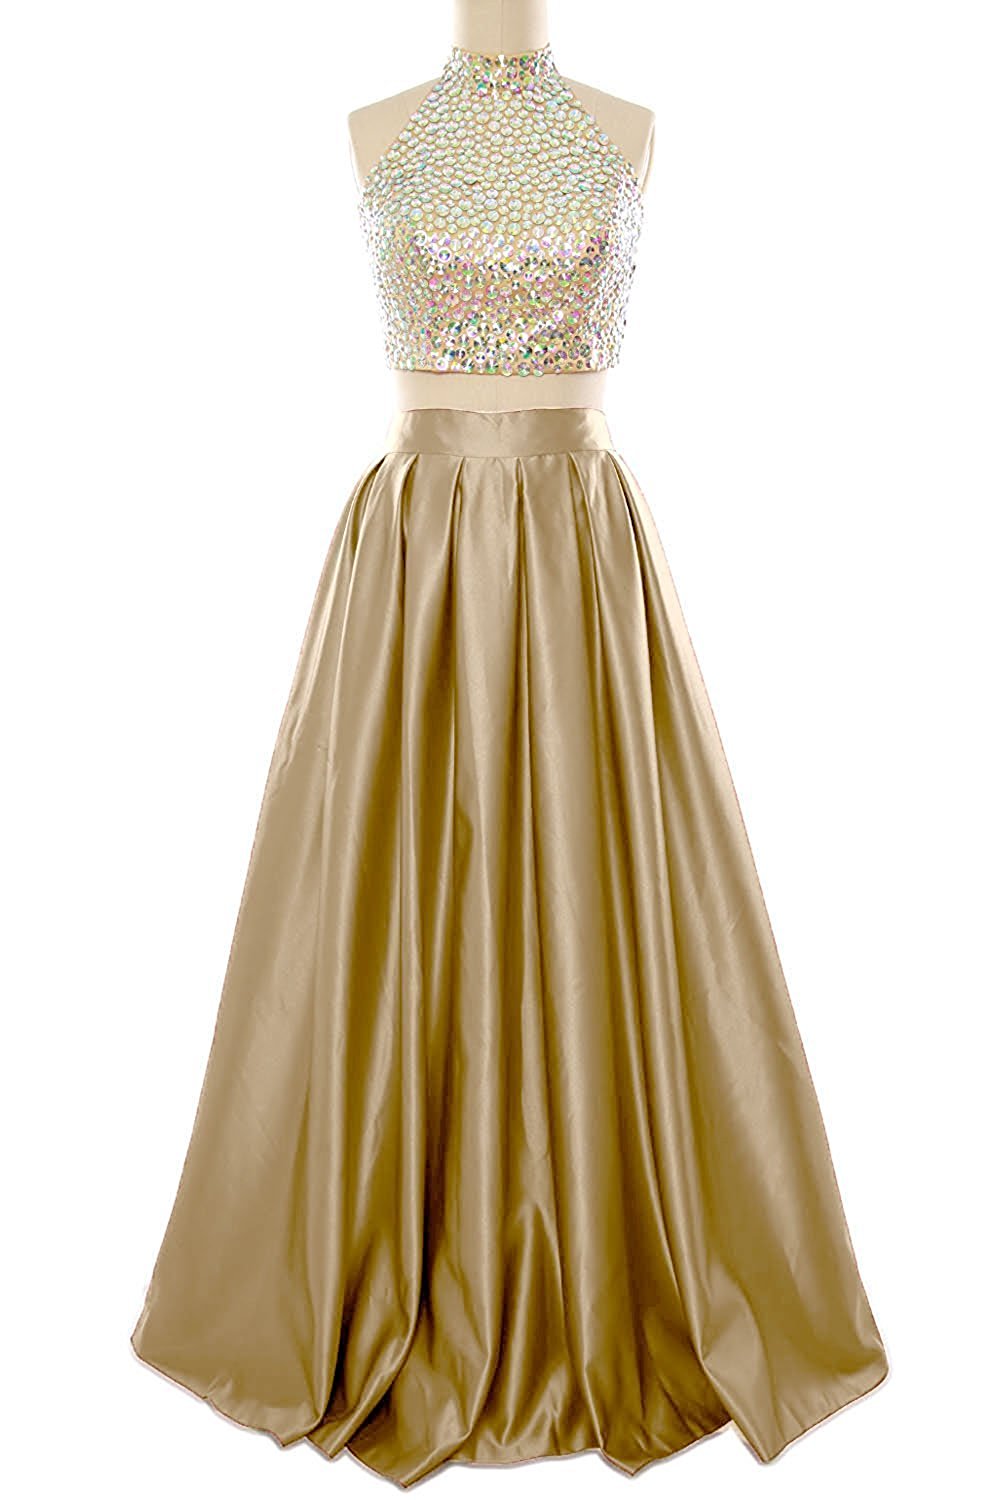 High Neck Prom Dress, Beaded Gold Color Prom Dress, Two Piece Prom Dress